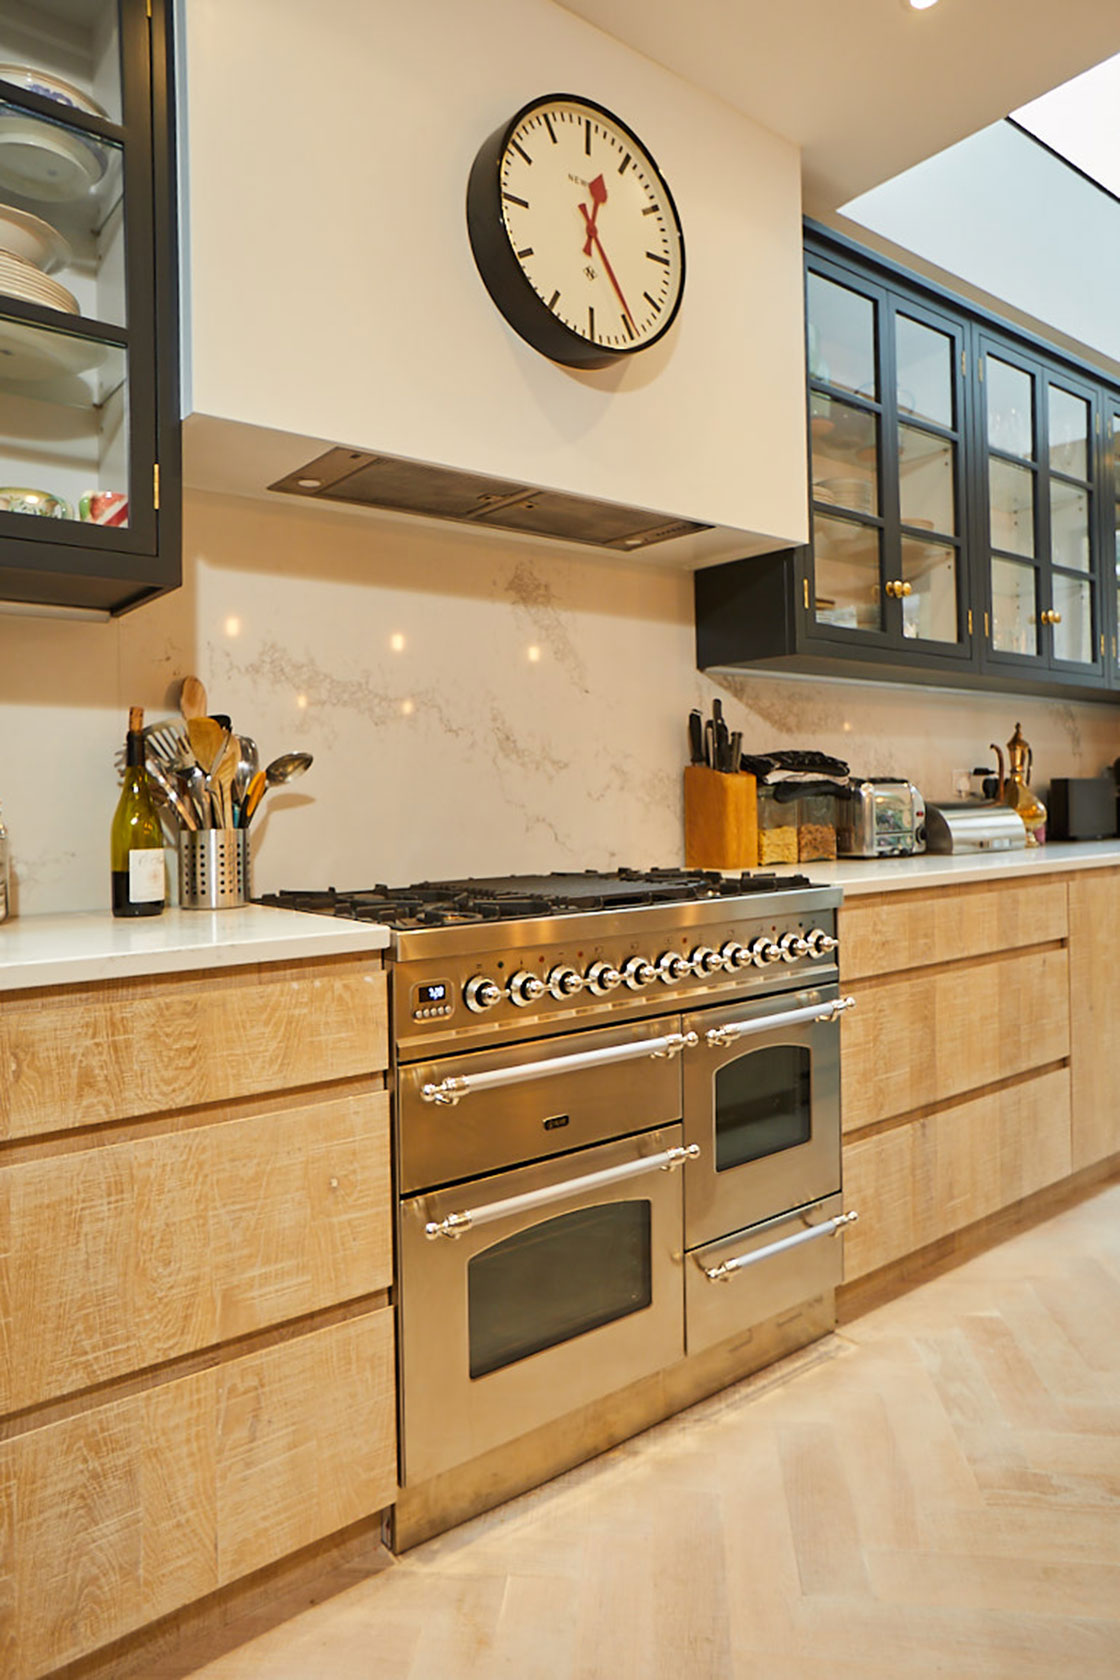 Stainless steel range cooker sits in between limed oak kitchen cabinets with floating minimal white canopy